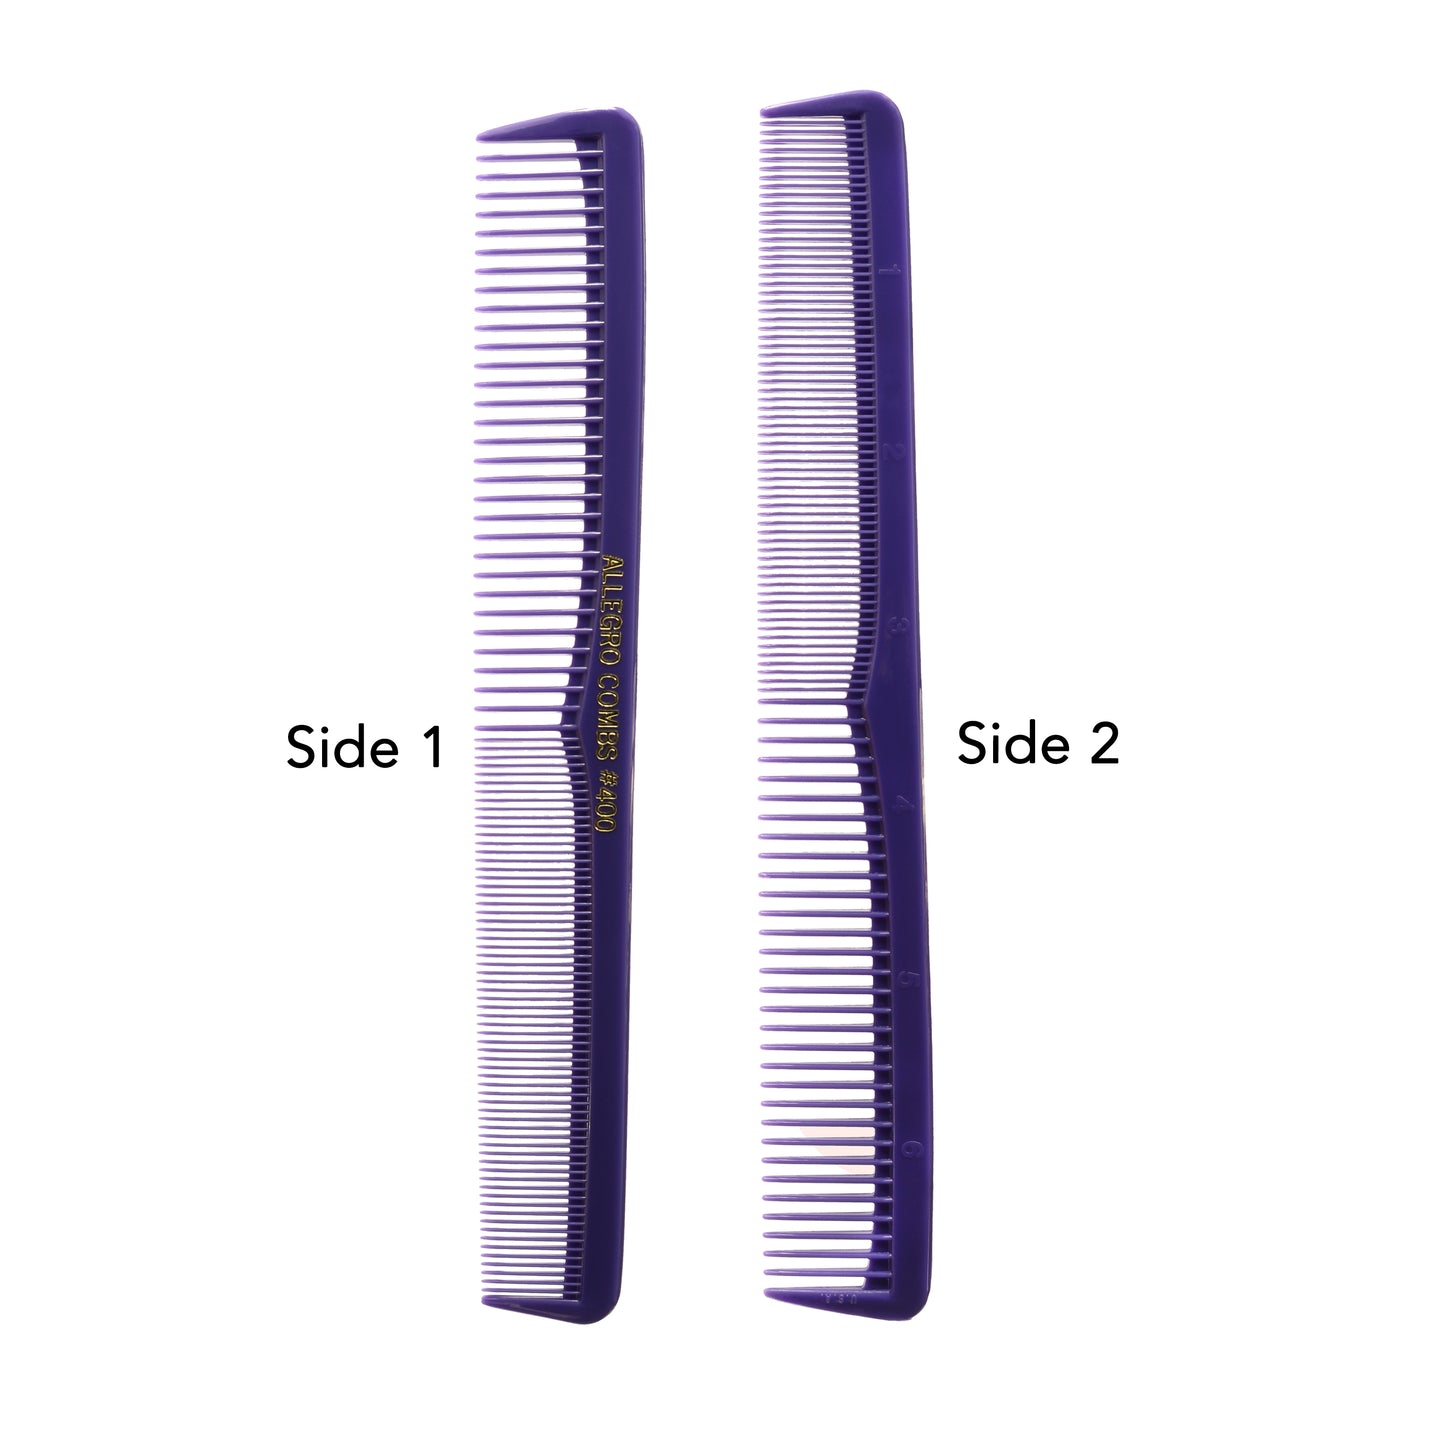 Allegro Combs 400 Hair Combs Barber Comb Set Hair Cutting Pocket Comb For Hair Stylist Styling Comb Men’s Women’s Made In USA Purple 12 Pk.